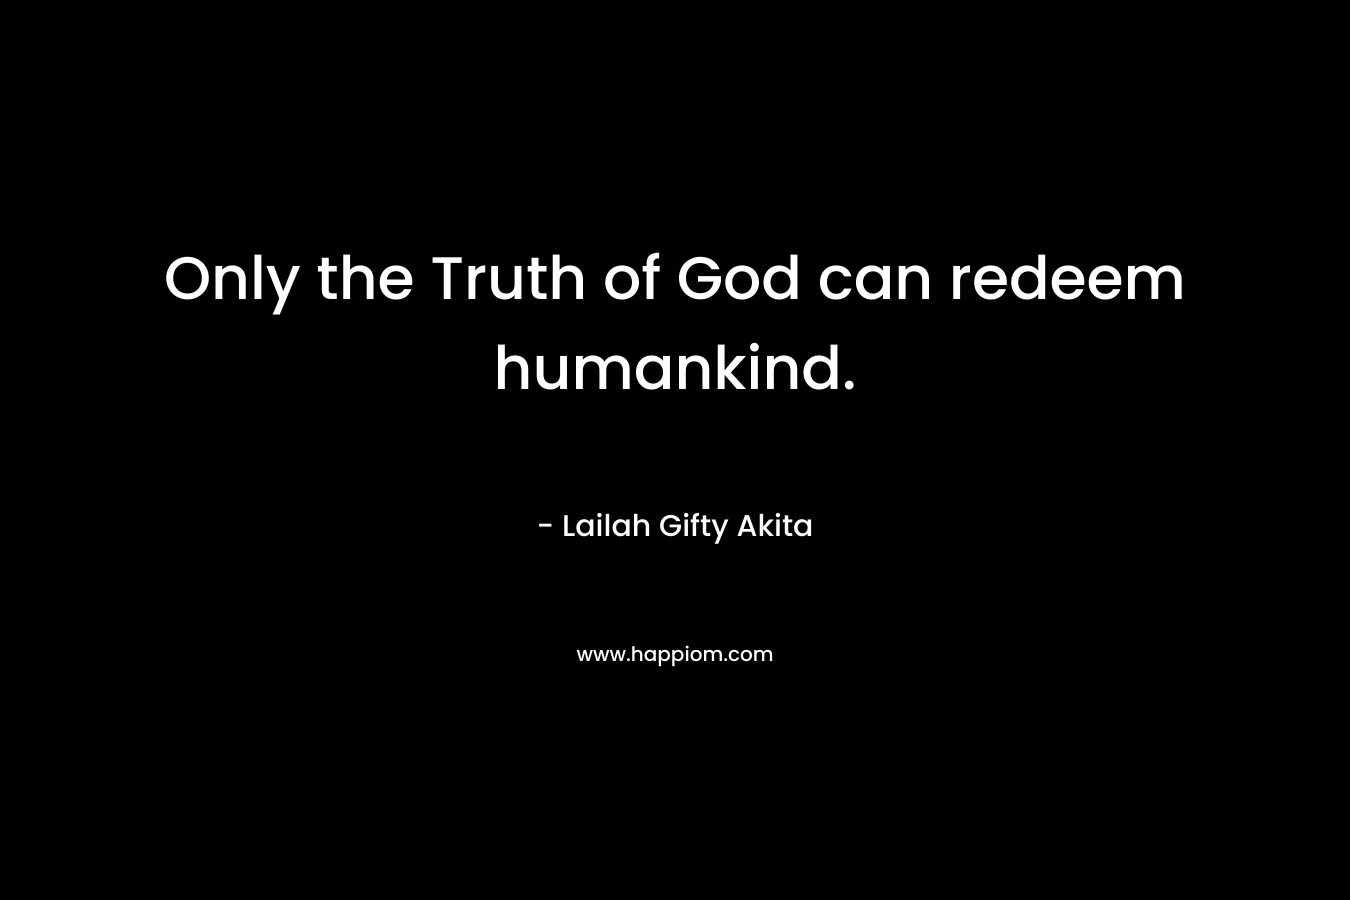 Only the Truth of God can redeem humankind.